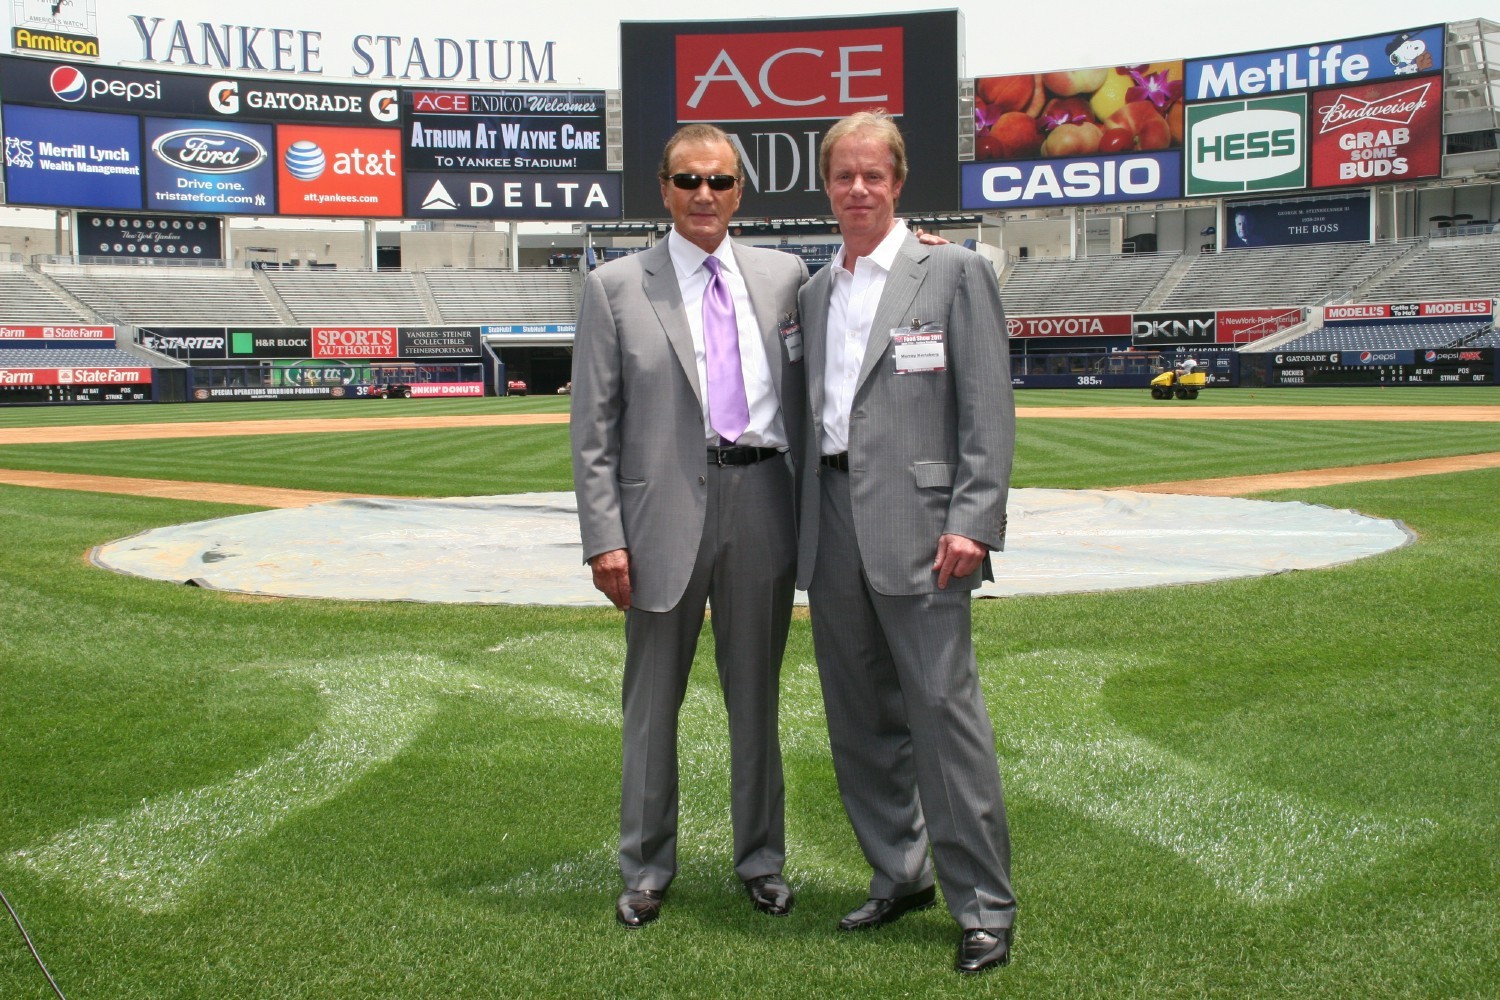 Ace CEO and VP in the Ball Field for the Food Show Event @ Yankee Stadium.